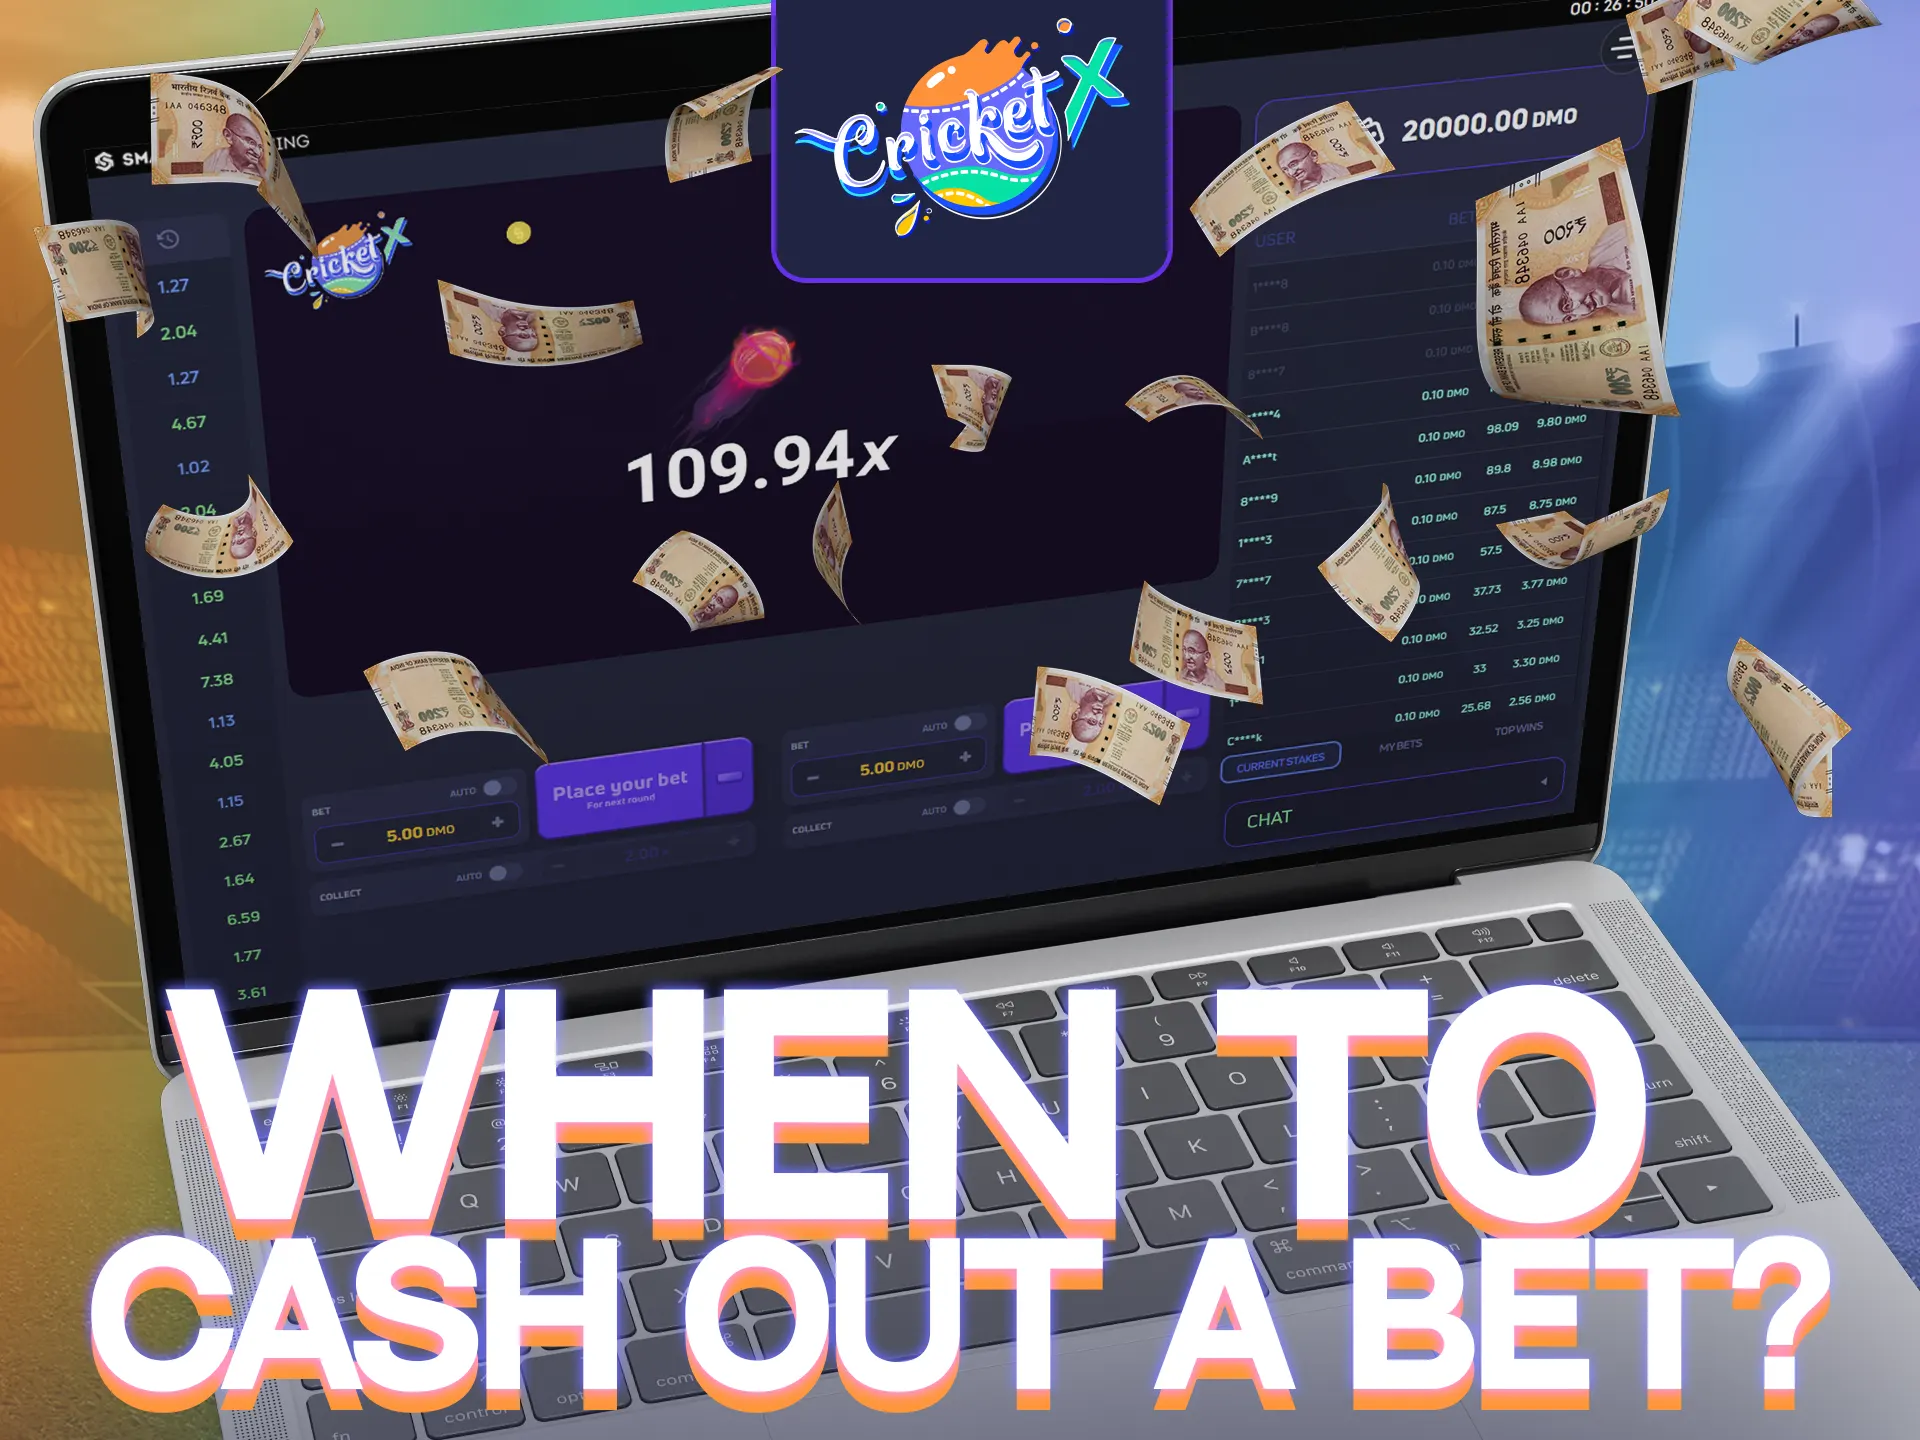 Cricket X Tip: Optimize winnings by timing cash-outs wisely, balancing withdrawal timing and coefficient.